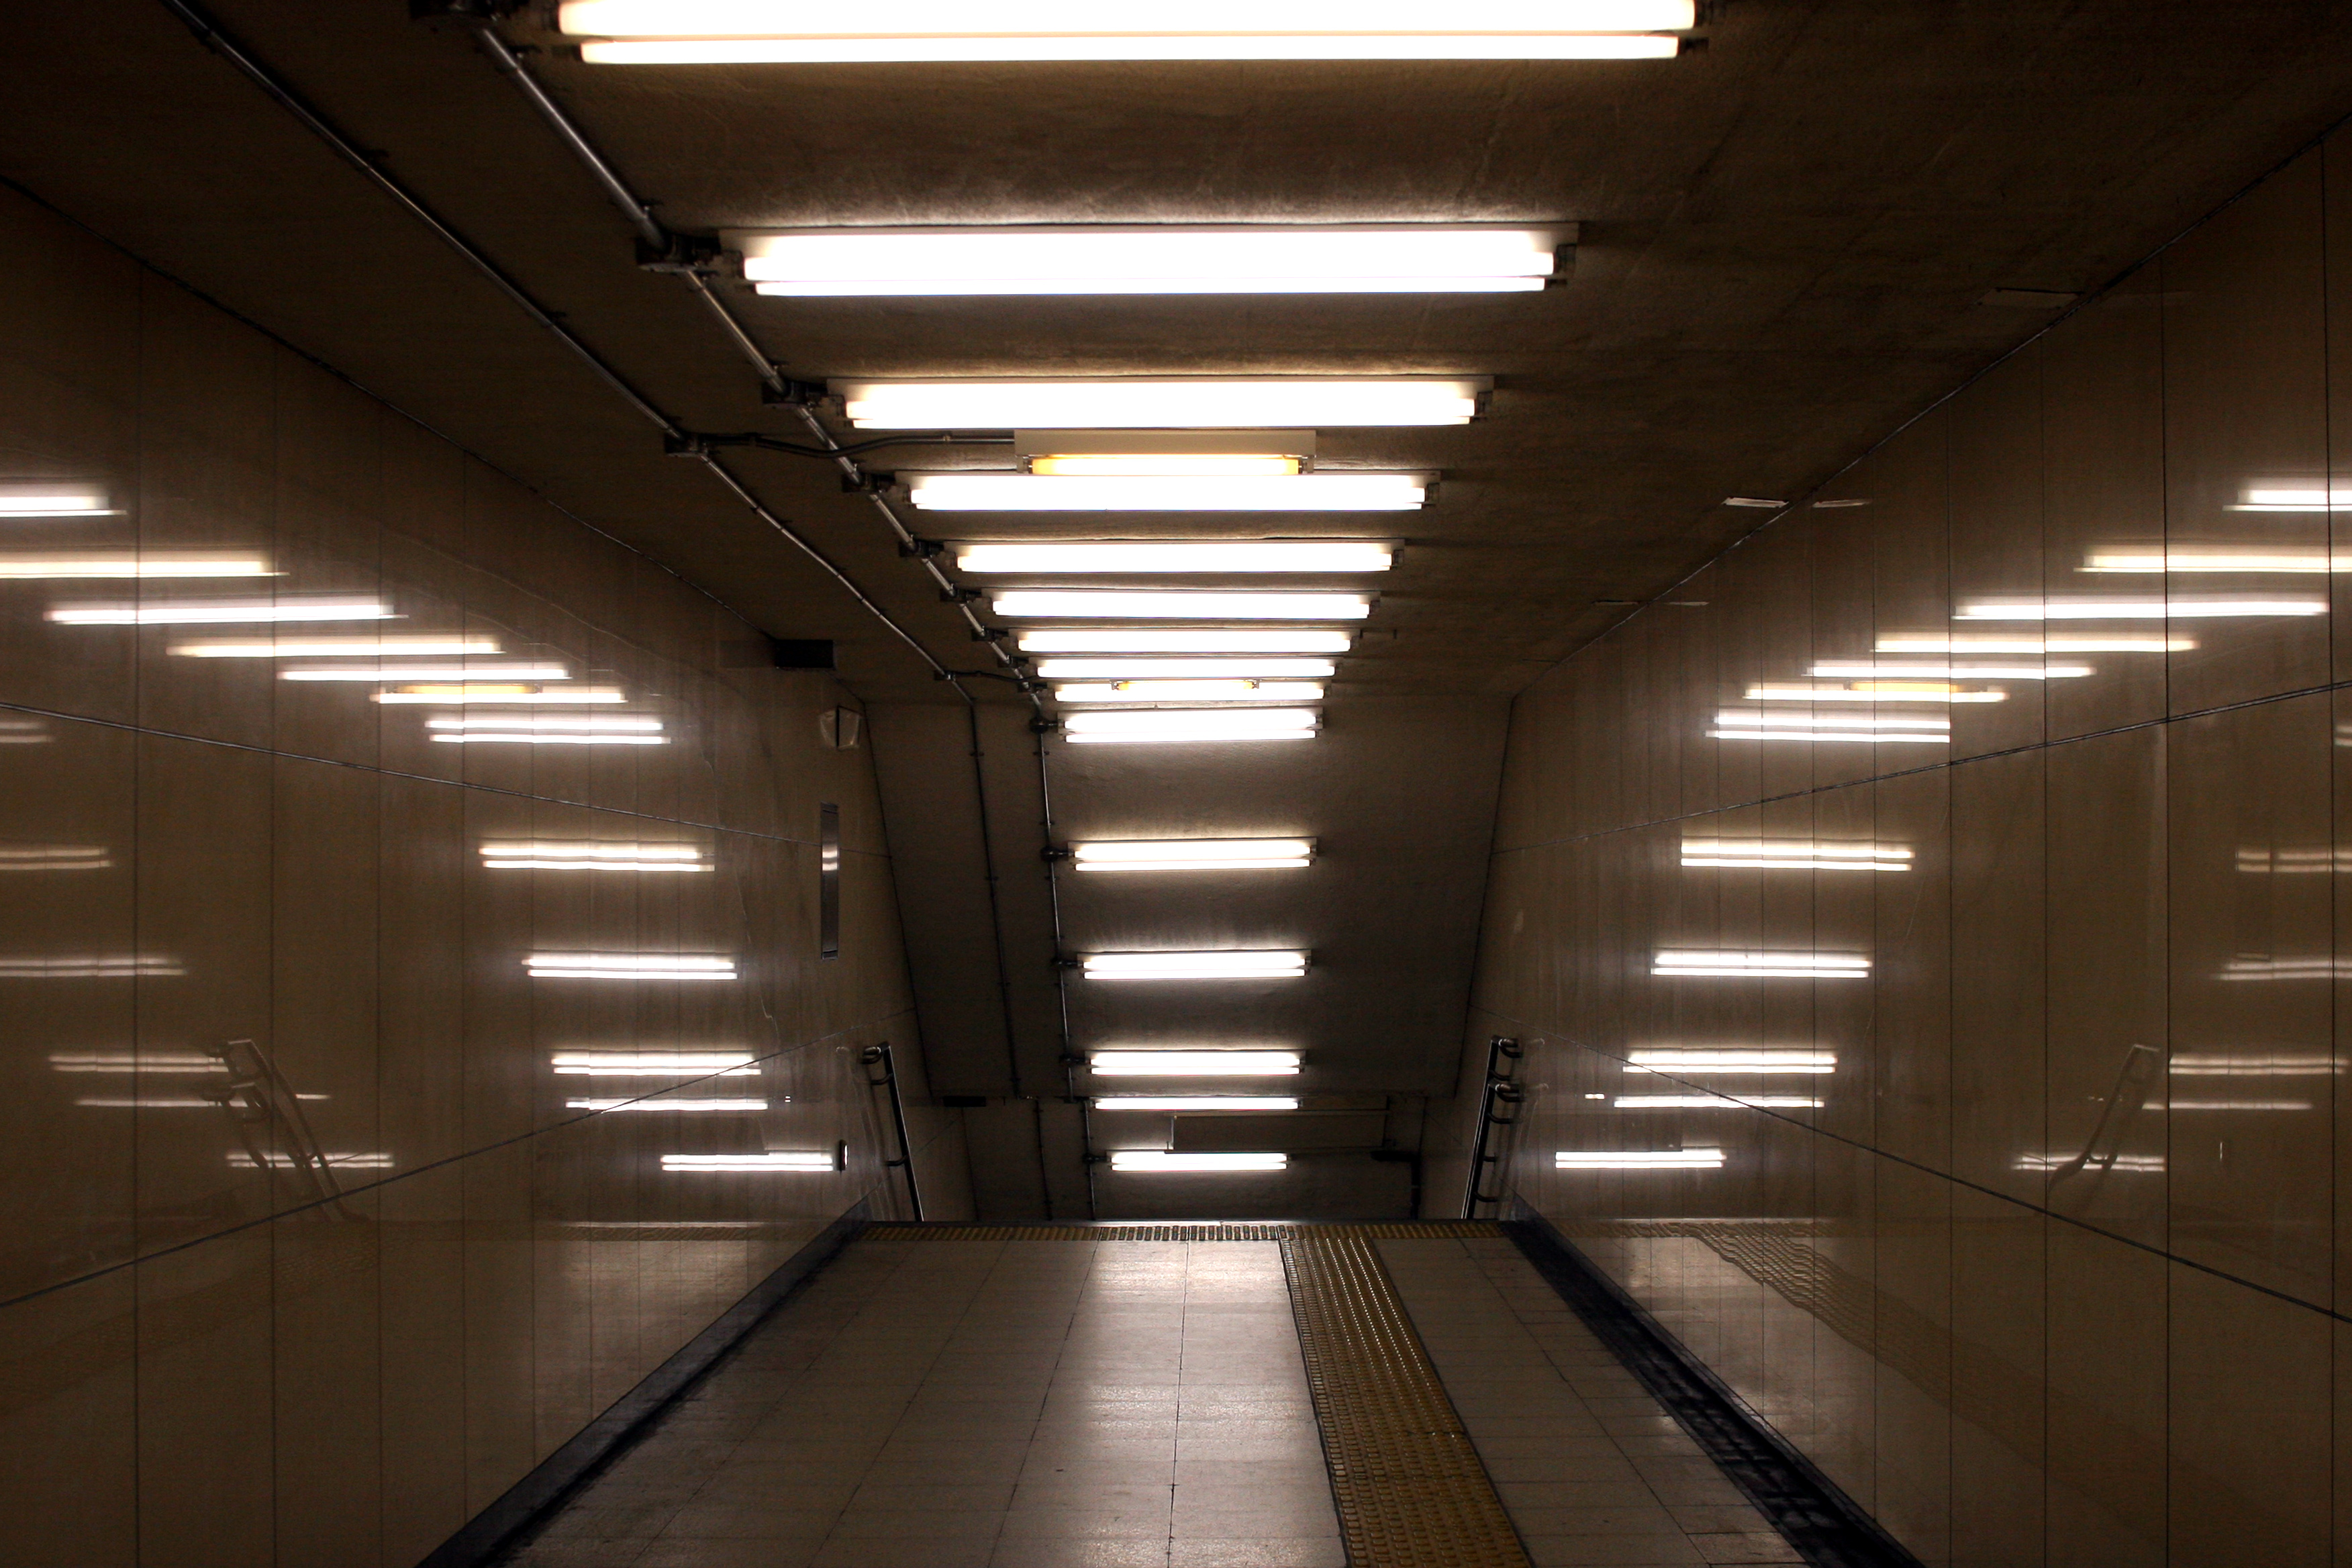 What are fluorescent lamps?